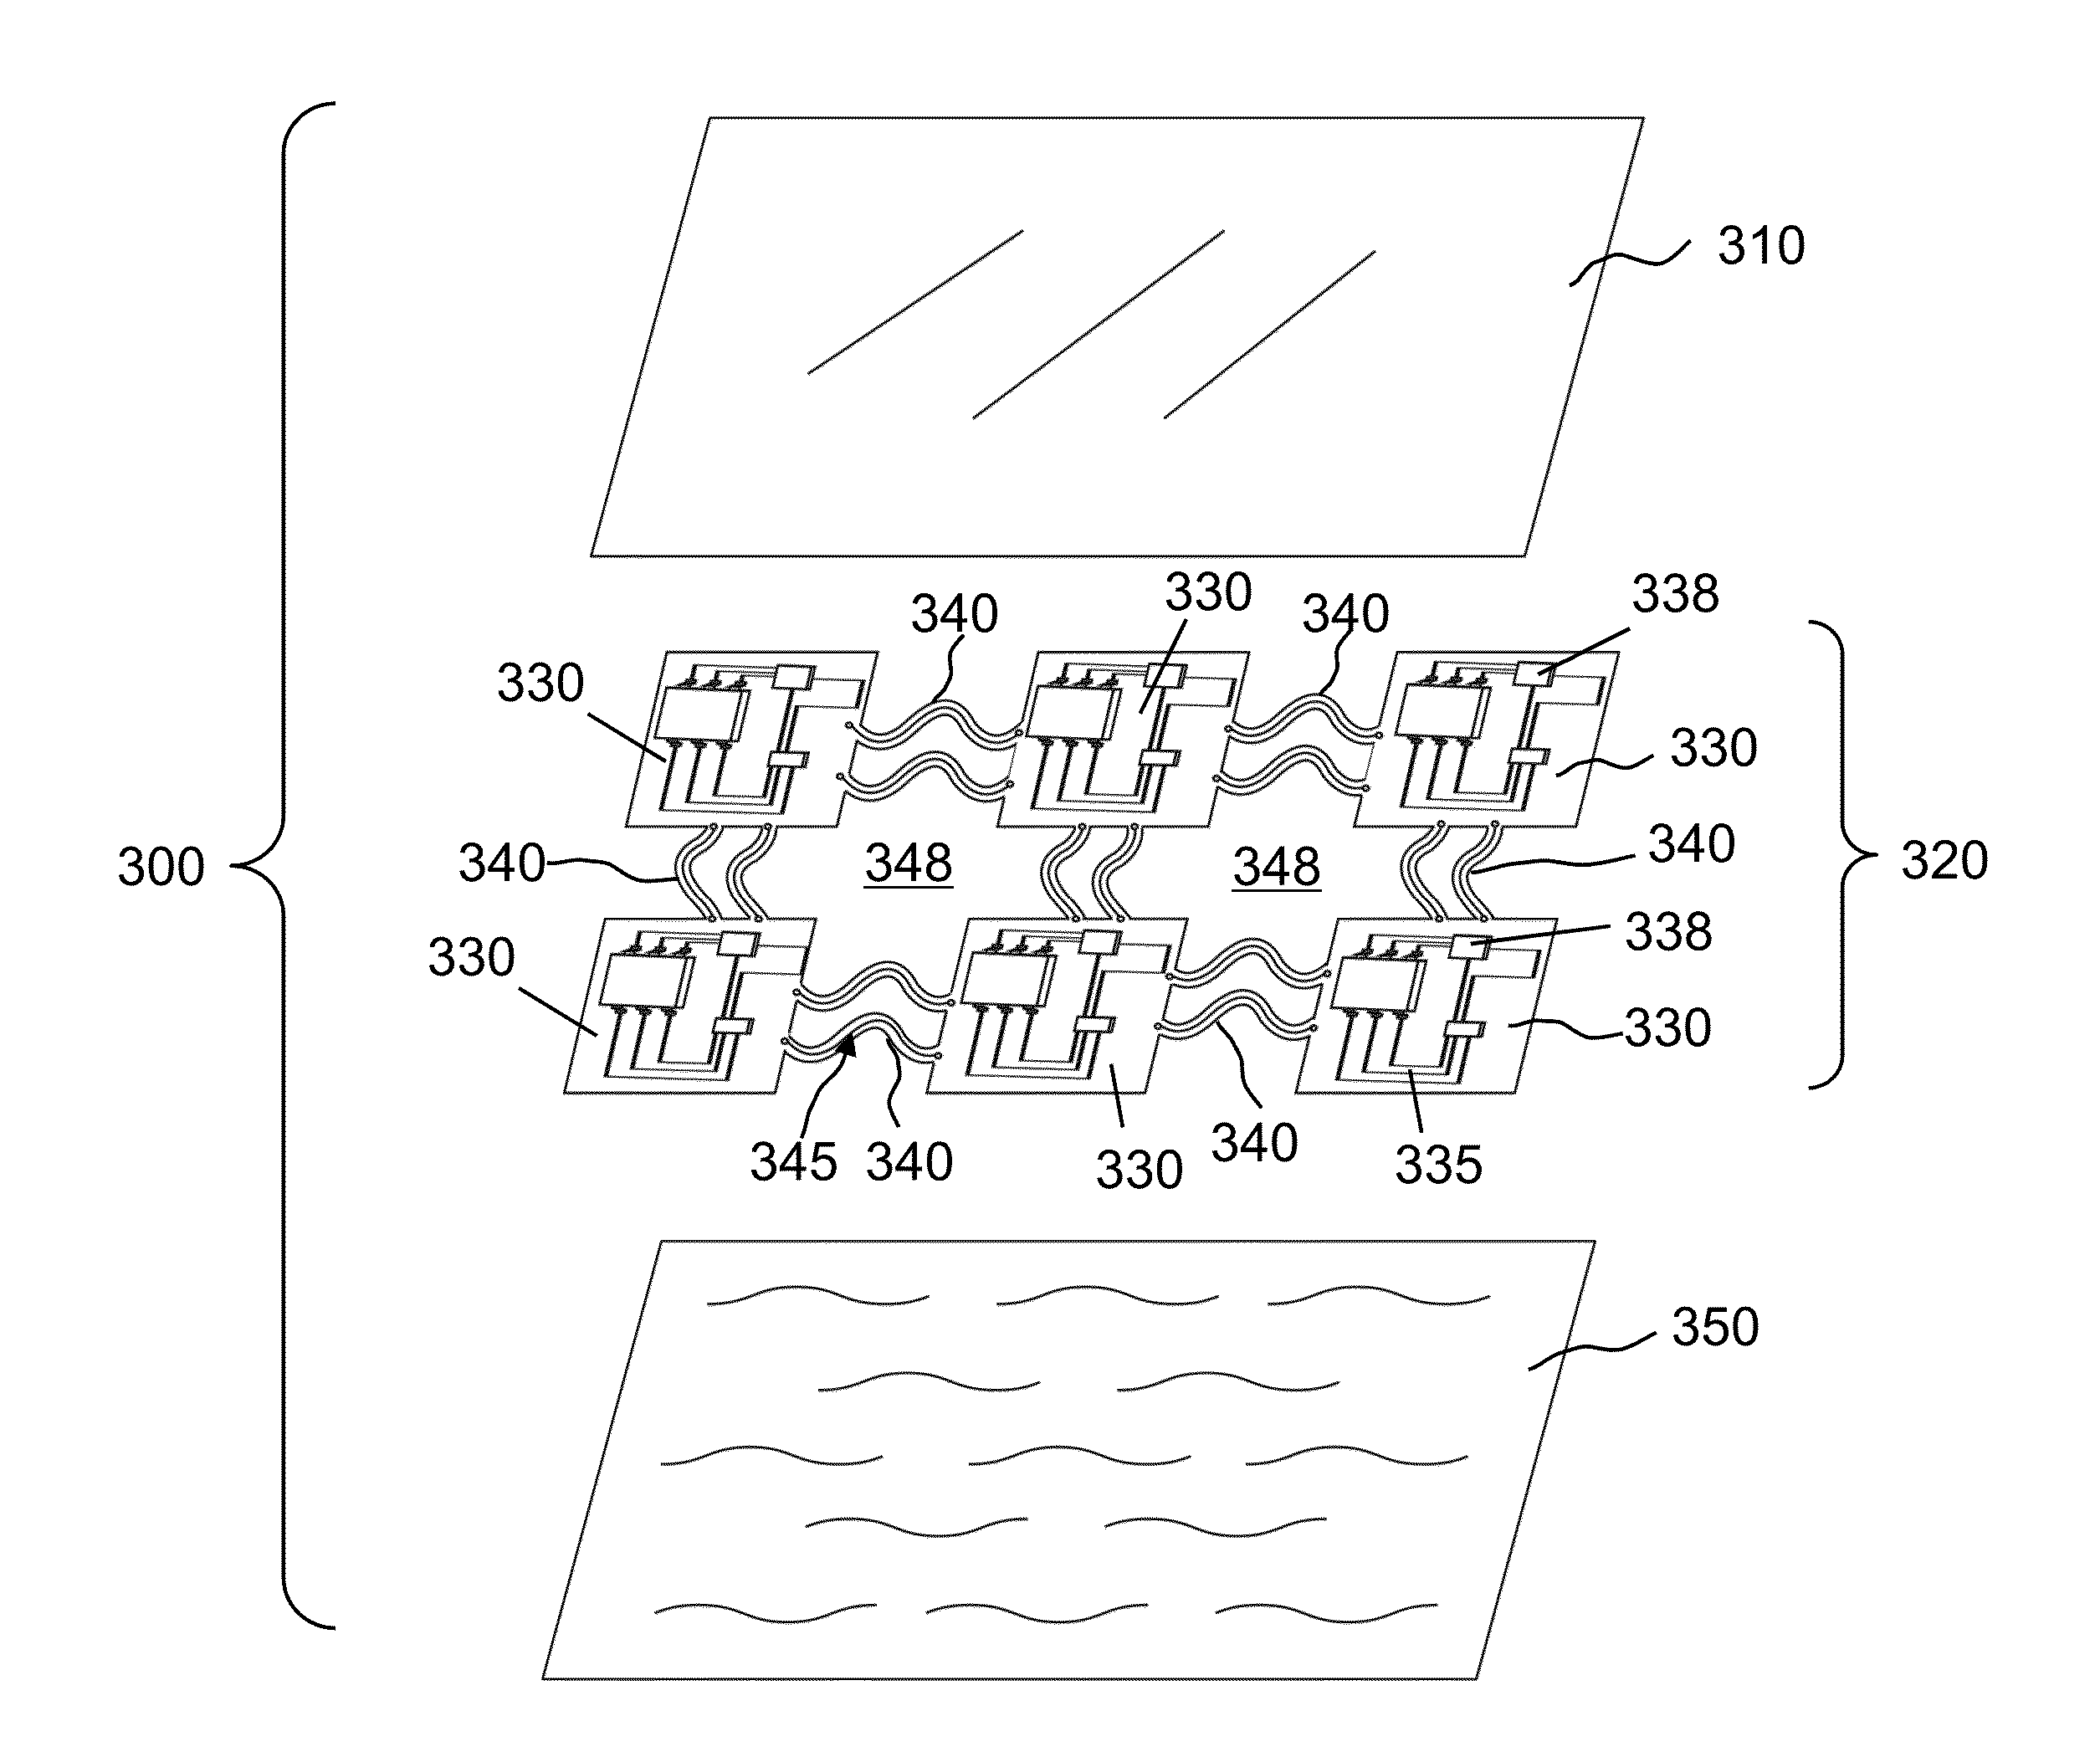 Stretchable electronic patch having a circuit layer undulating in the thickness direction